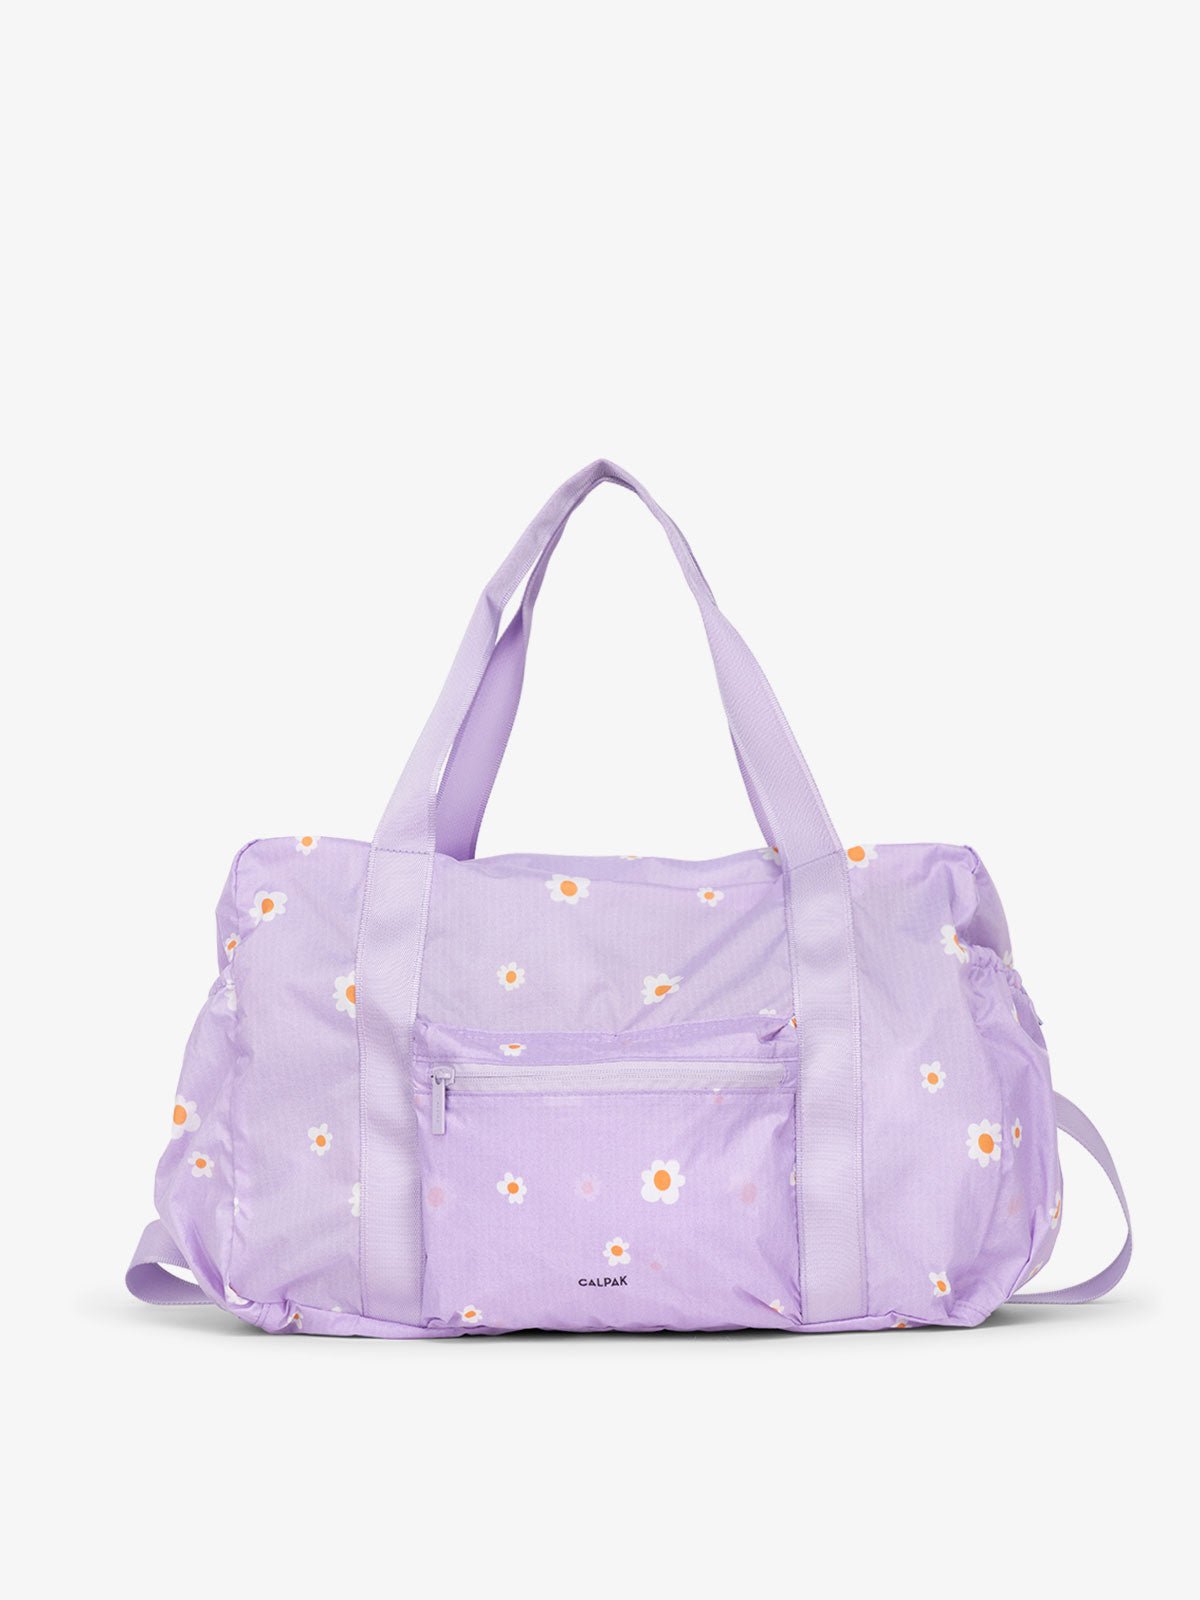 CALPAK Compakt duffel bag with removable crossbody strap and water resistant fabric in orchid fields